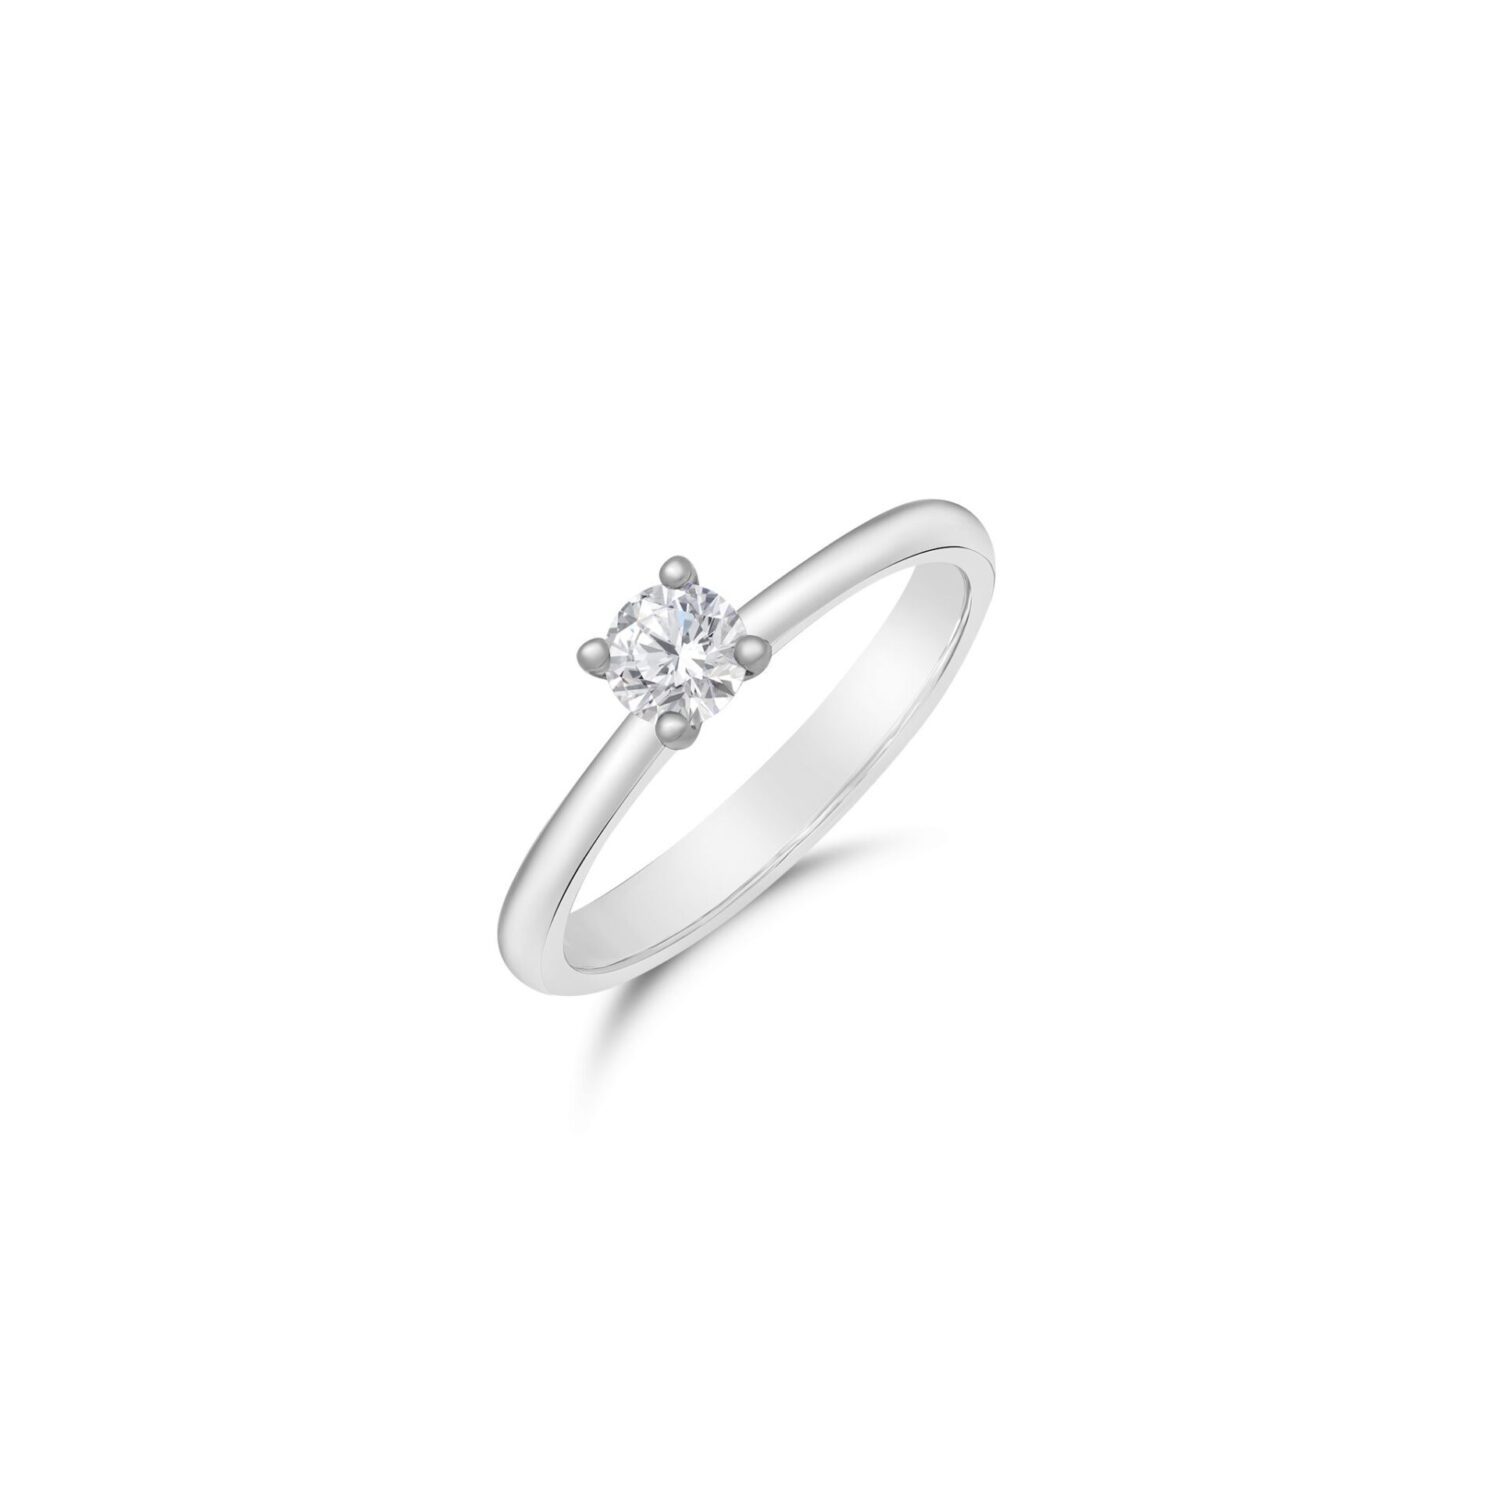 Lab grown diamonds in Cyprus - Profile Diamond Ring Square 0.3 Carat best quality and price